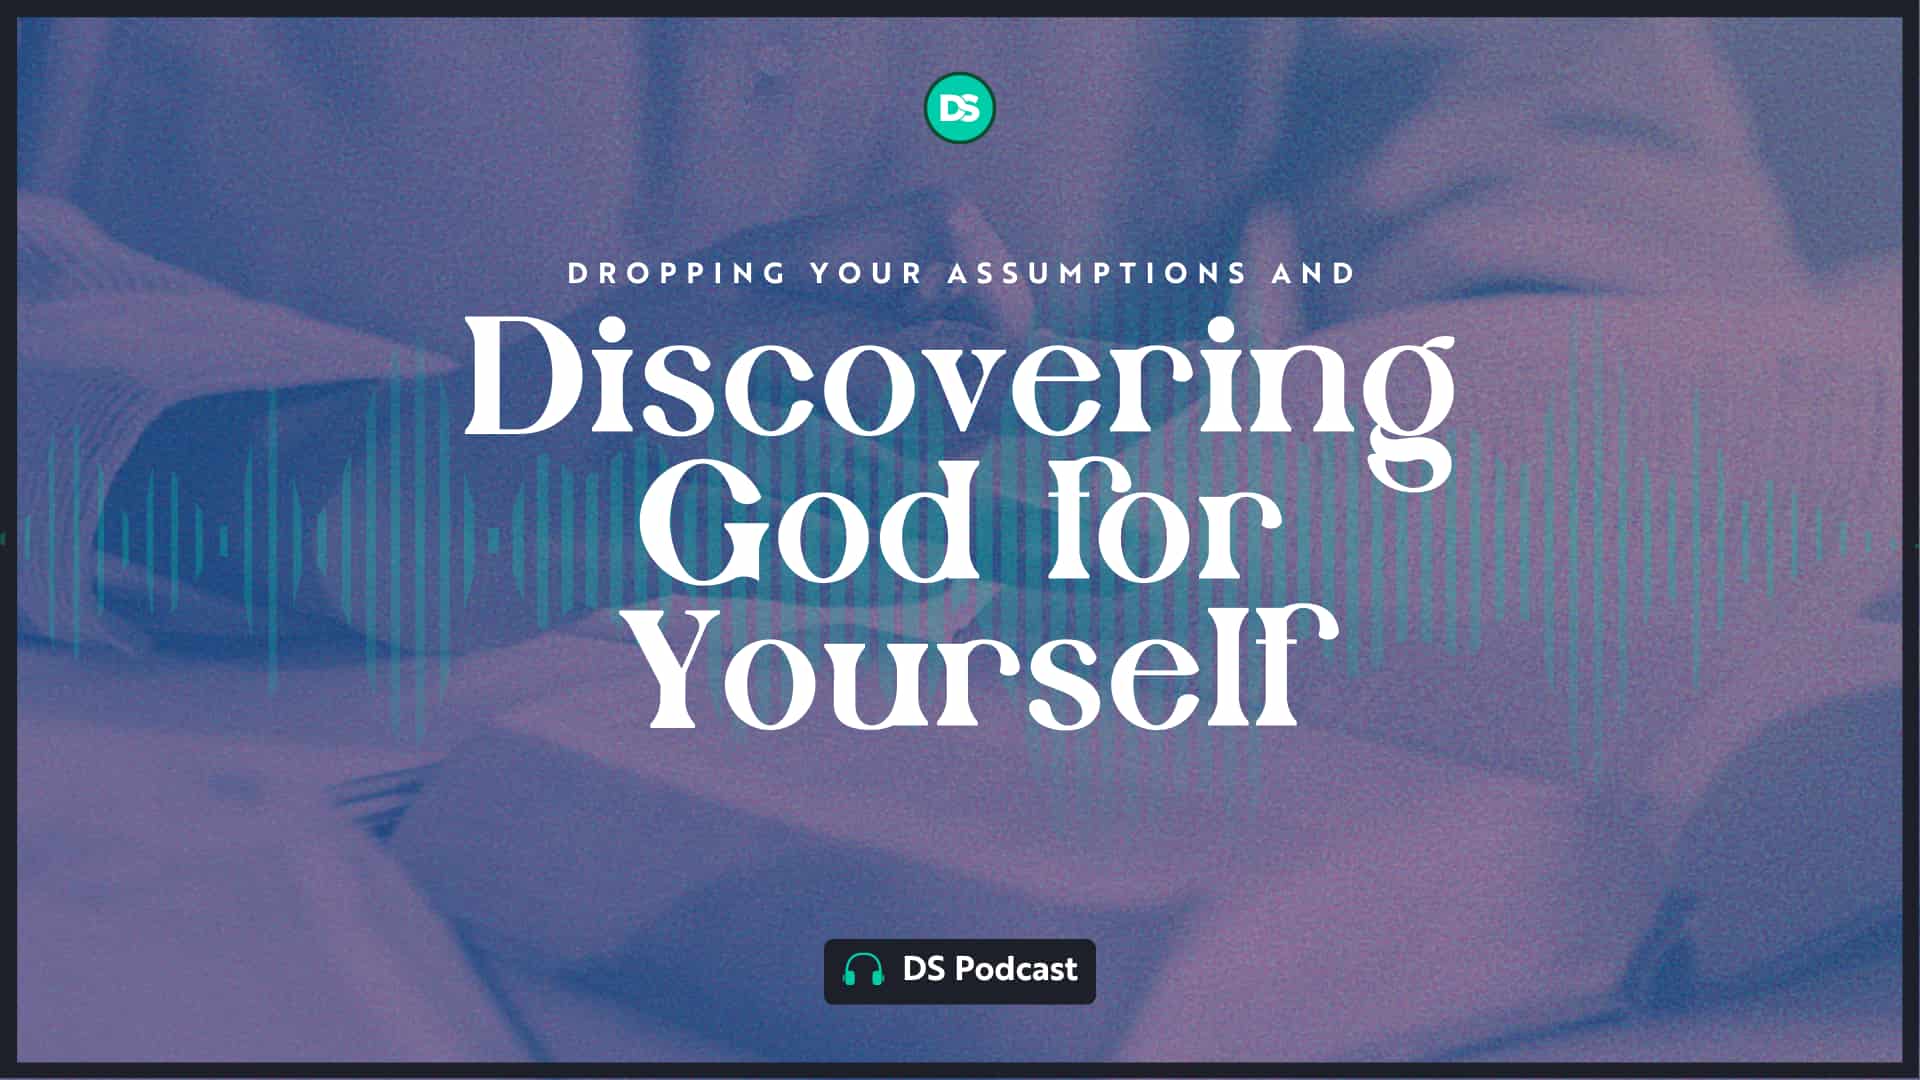 Dropping Your Assumptions and Discovering God for Yourself 5